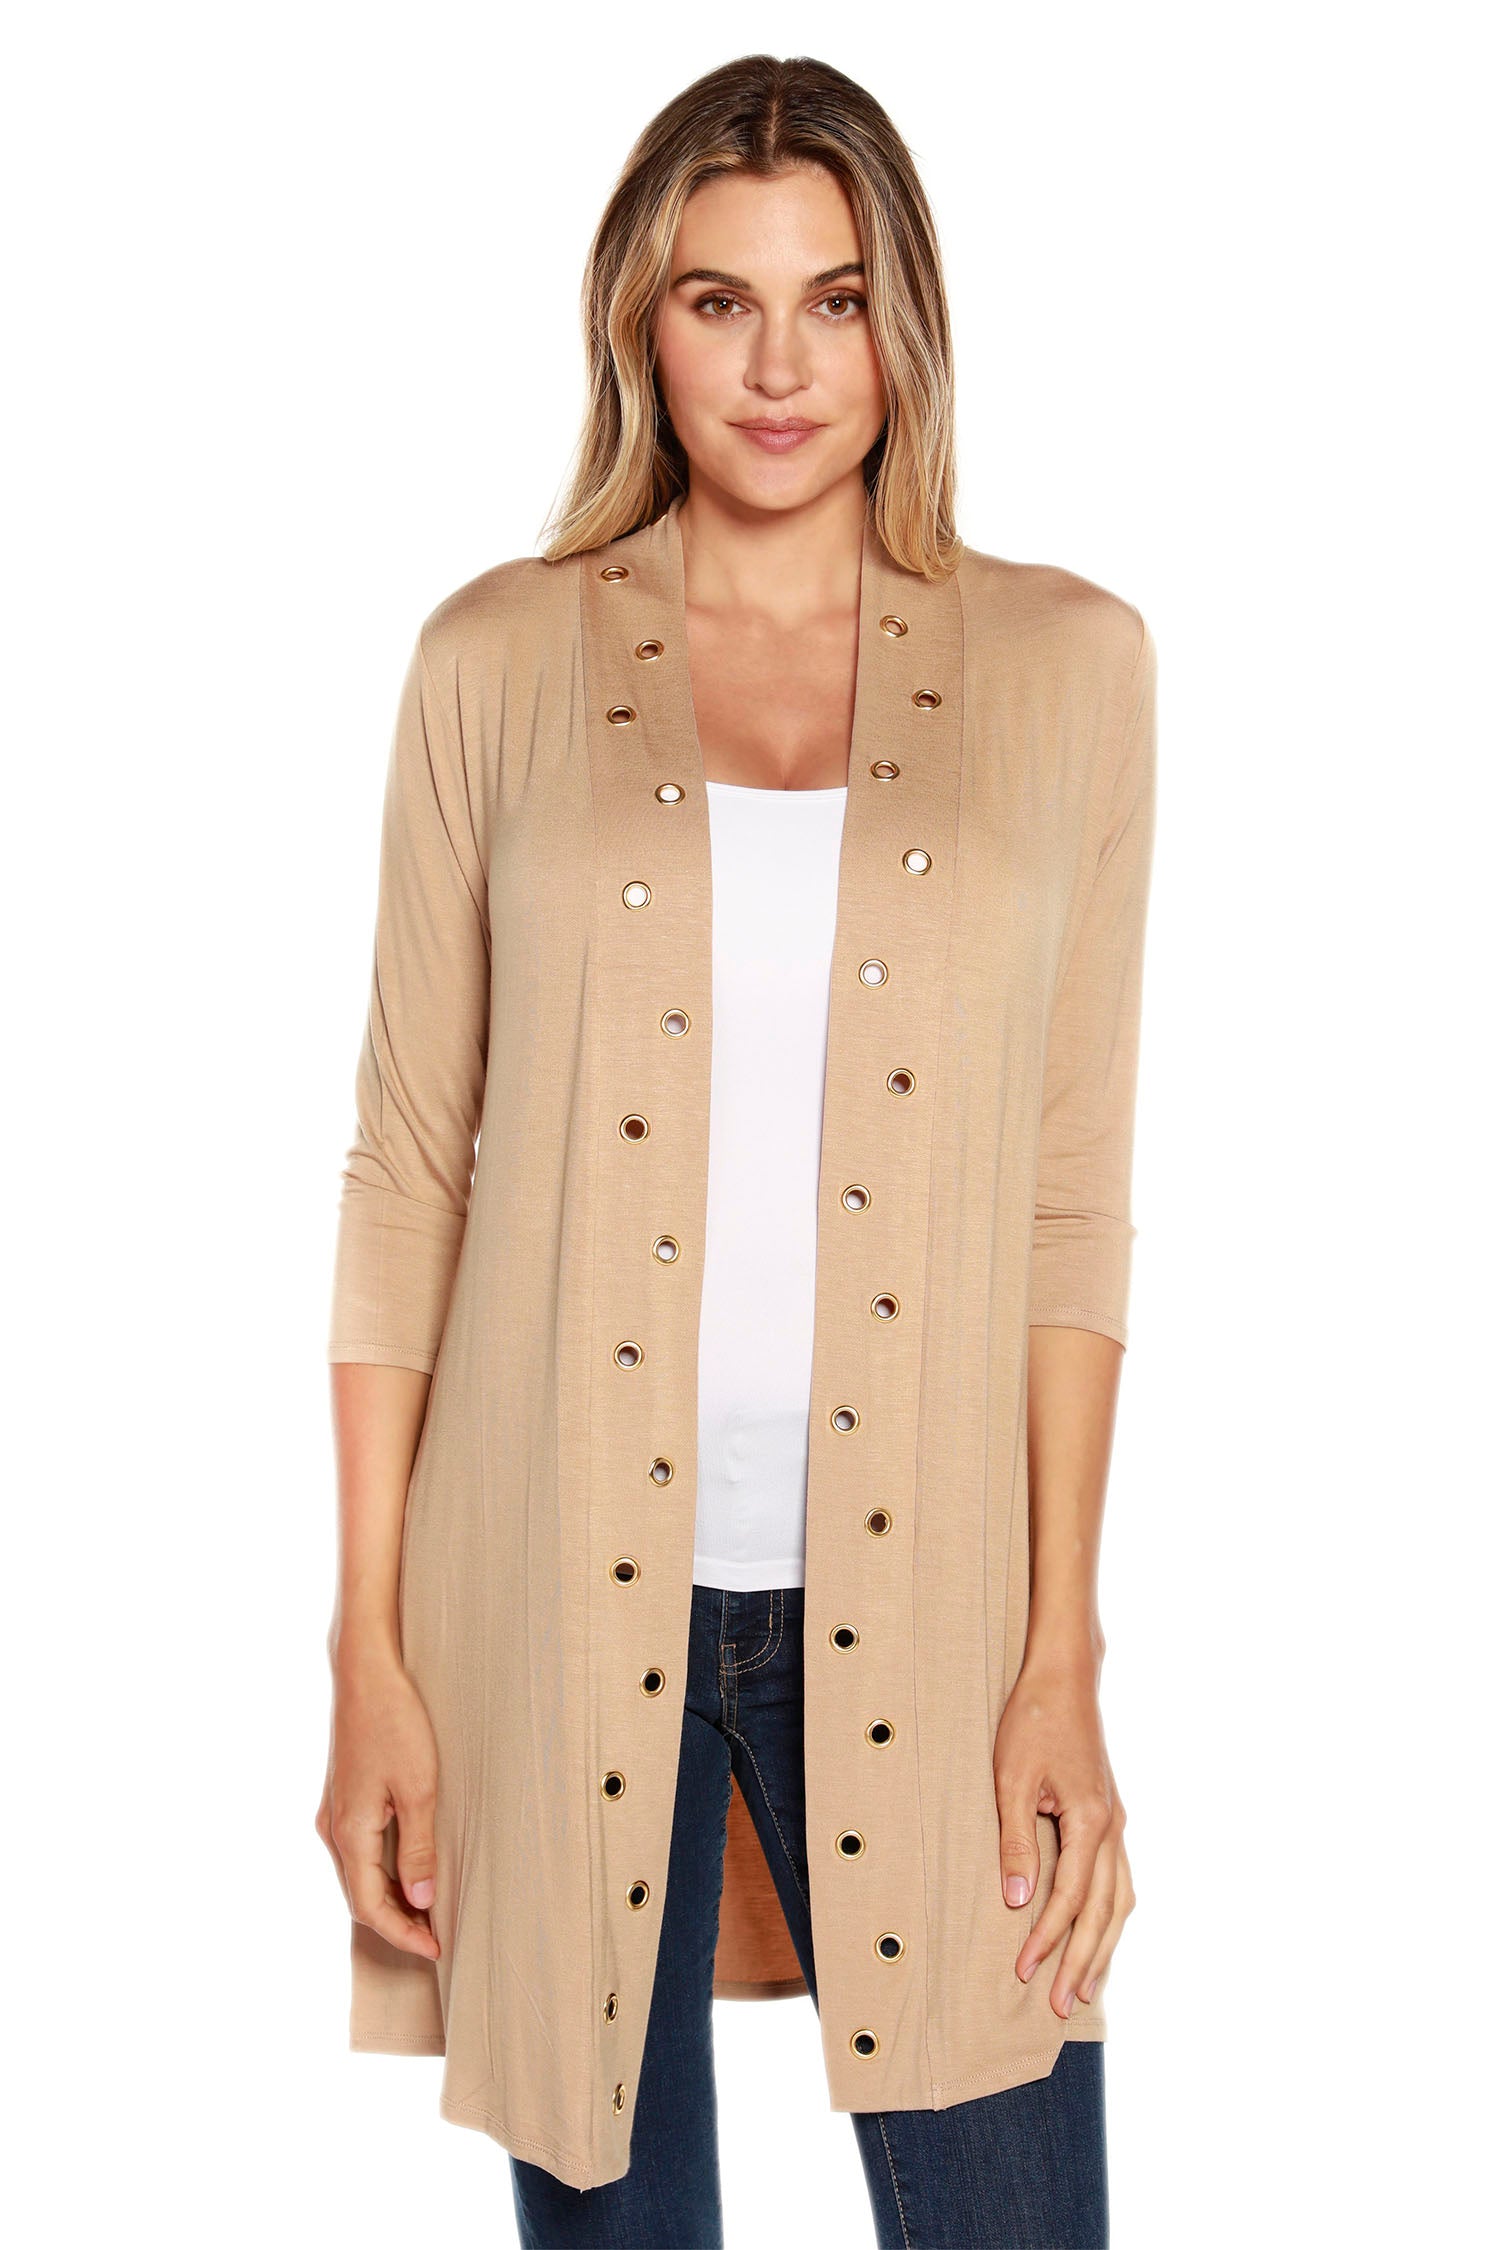 Women's Fashion Cardigan in a Soft Light Knit with 3/4 Sleeves and Grommet Trim